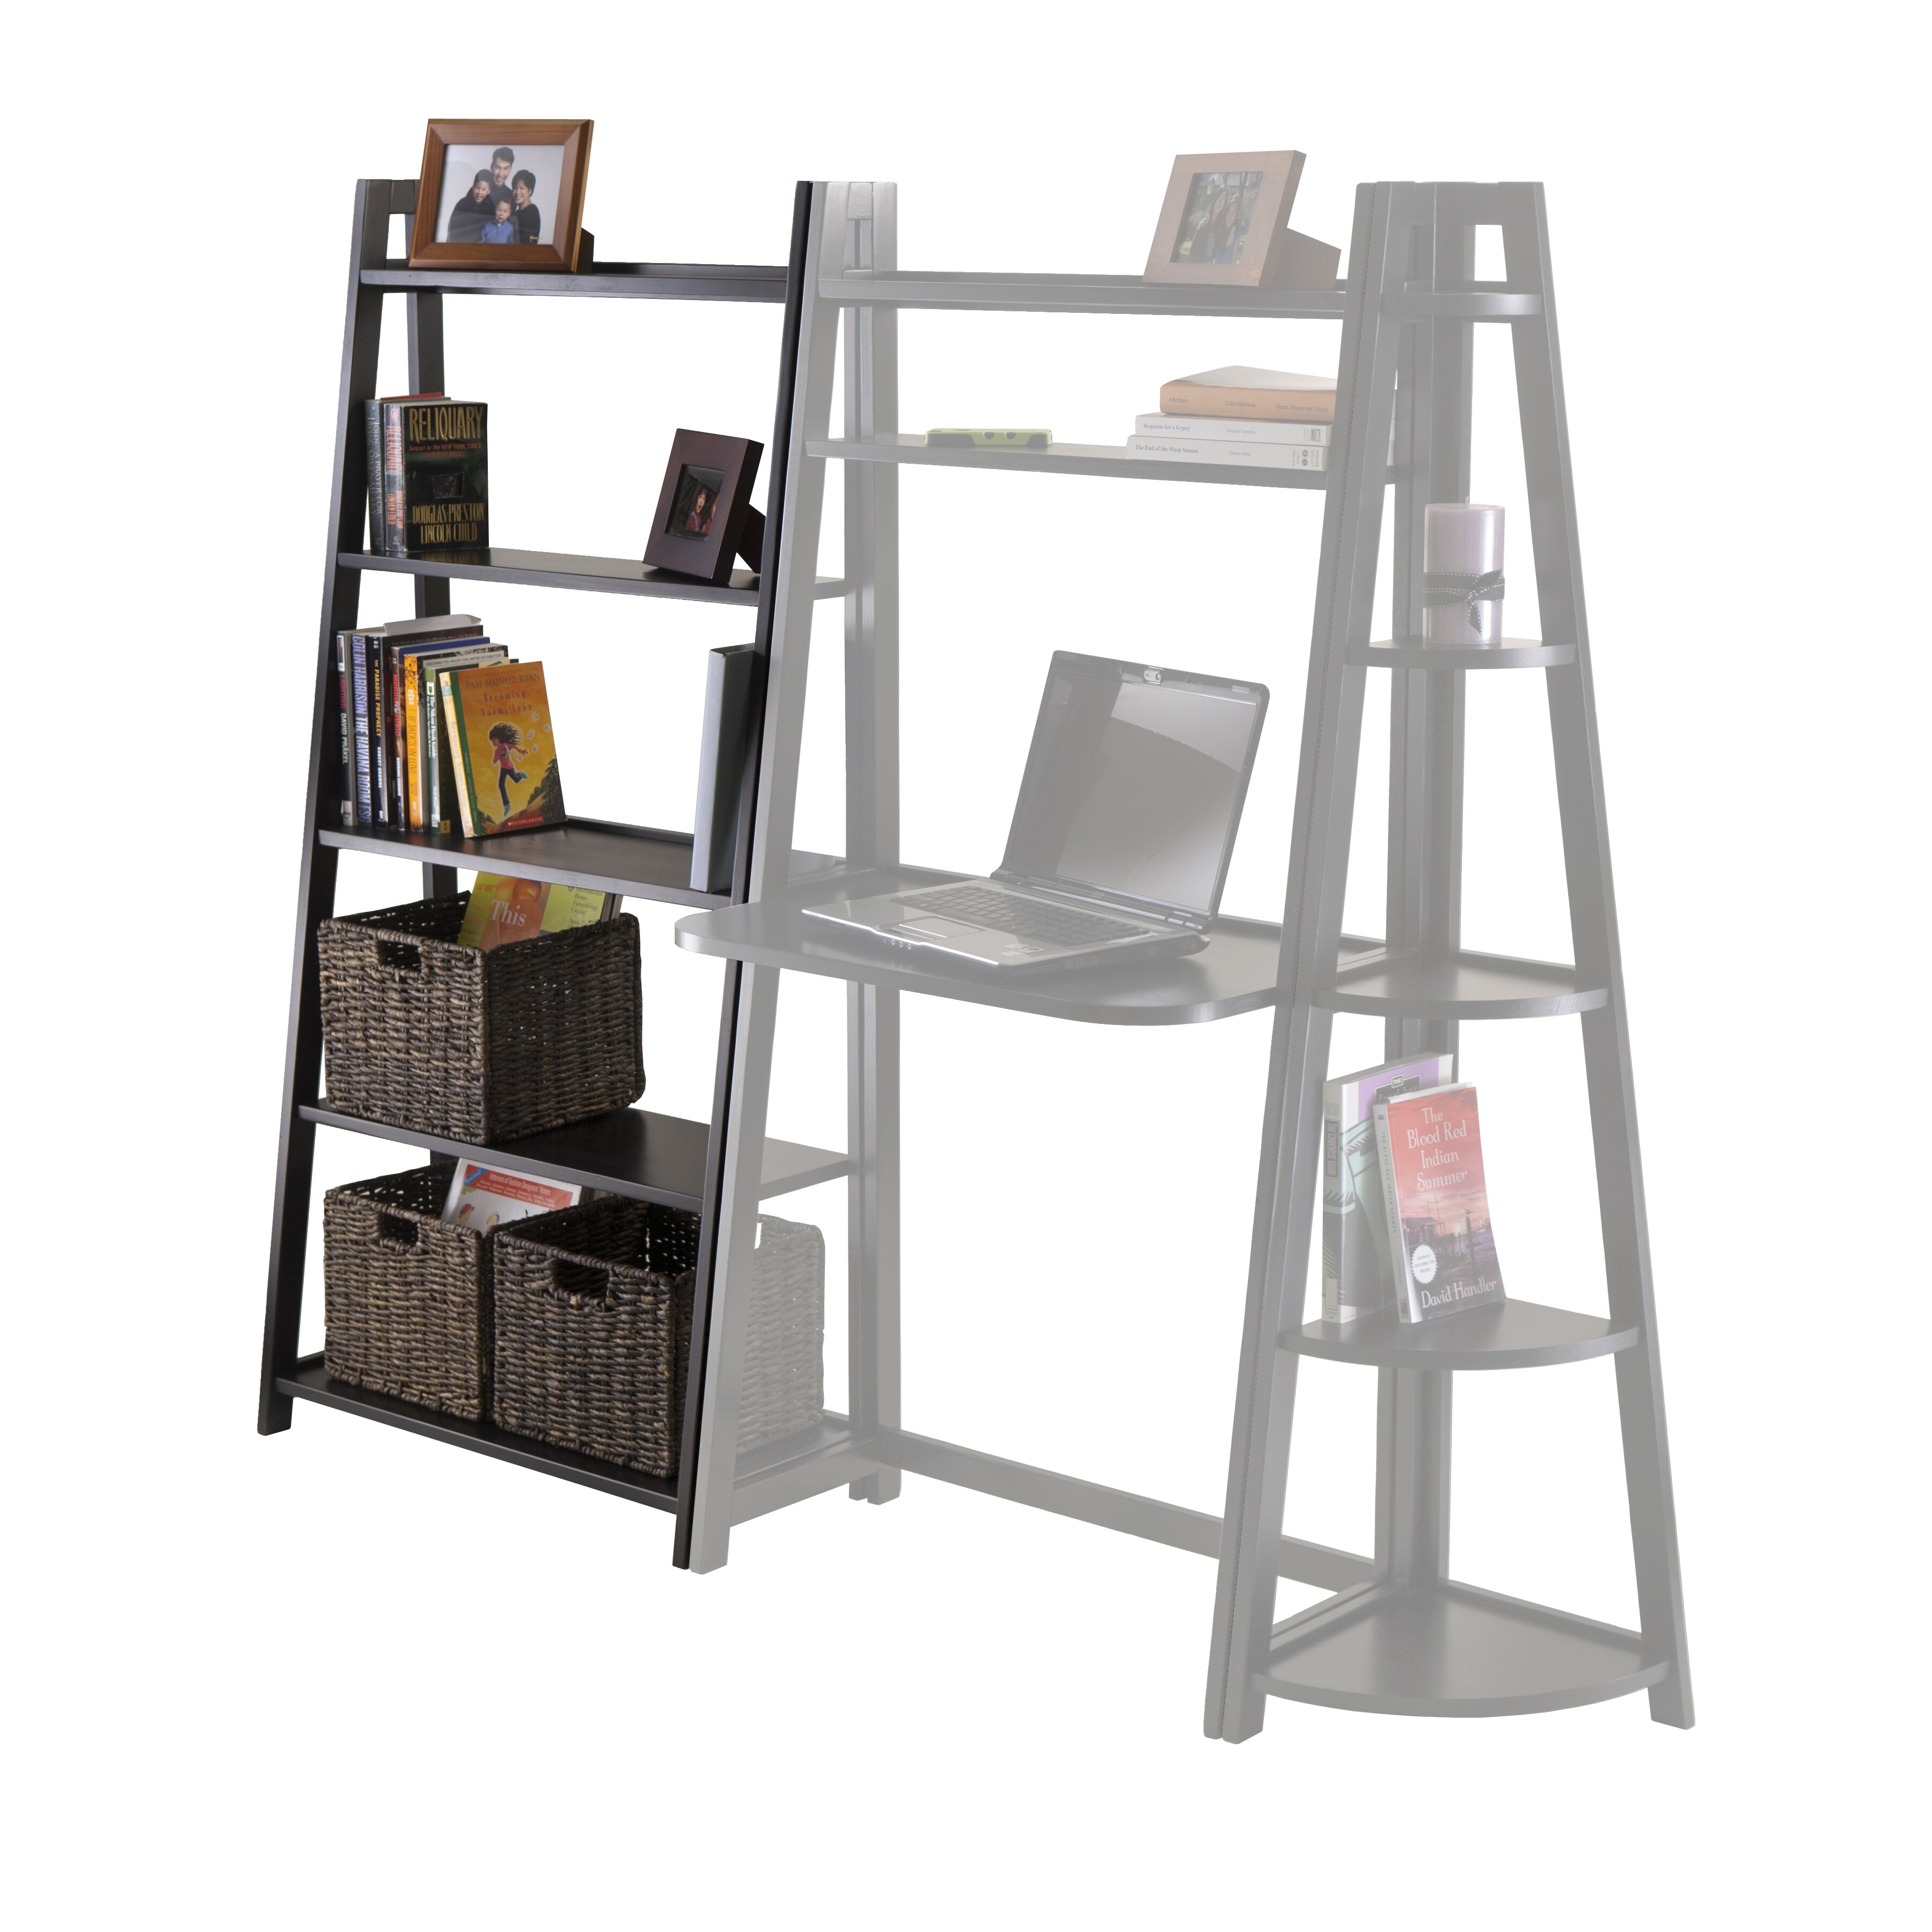 Winsome Adam A Frame  58 Leaning Bookcase Reviews Wayfair